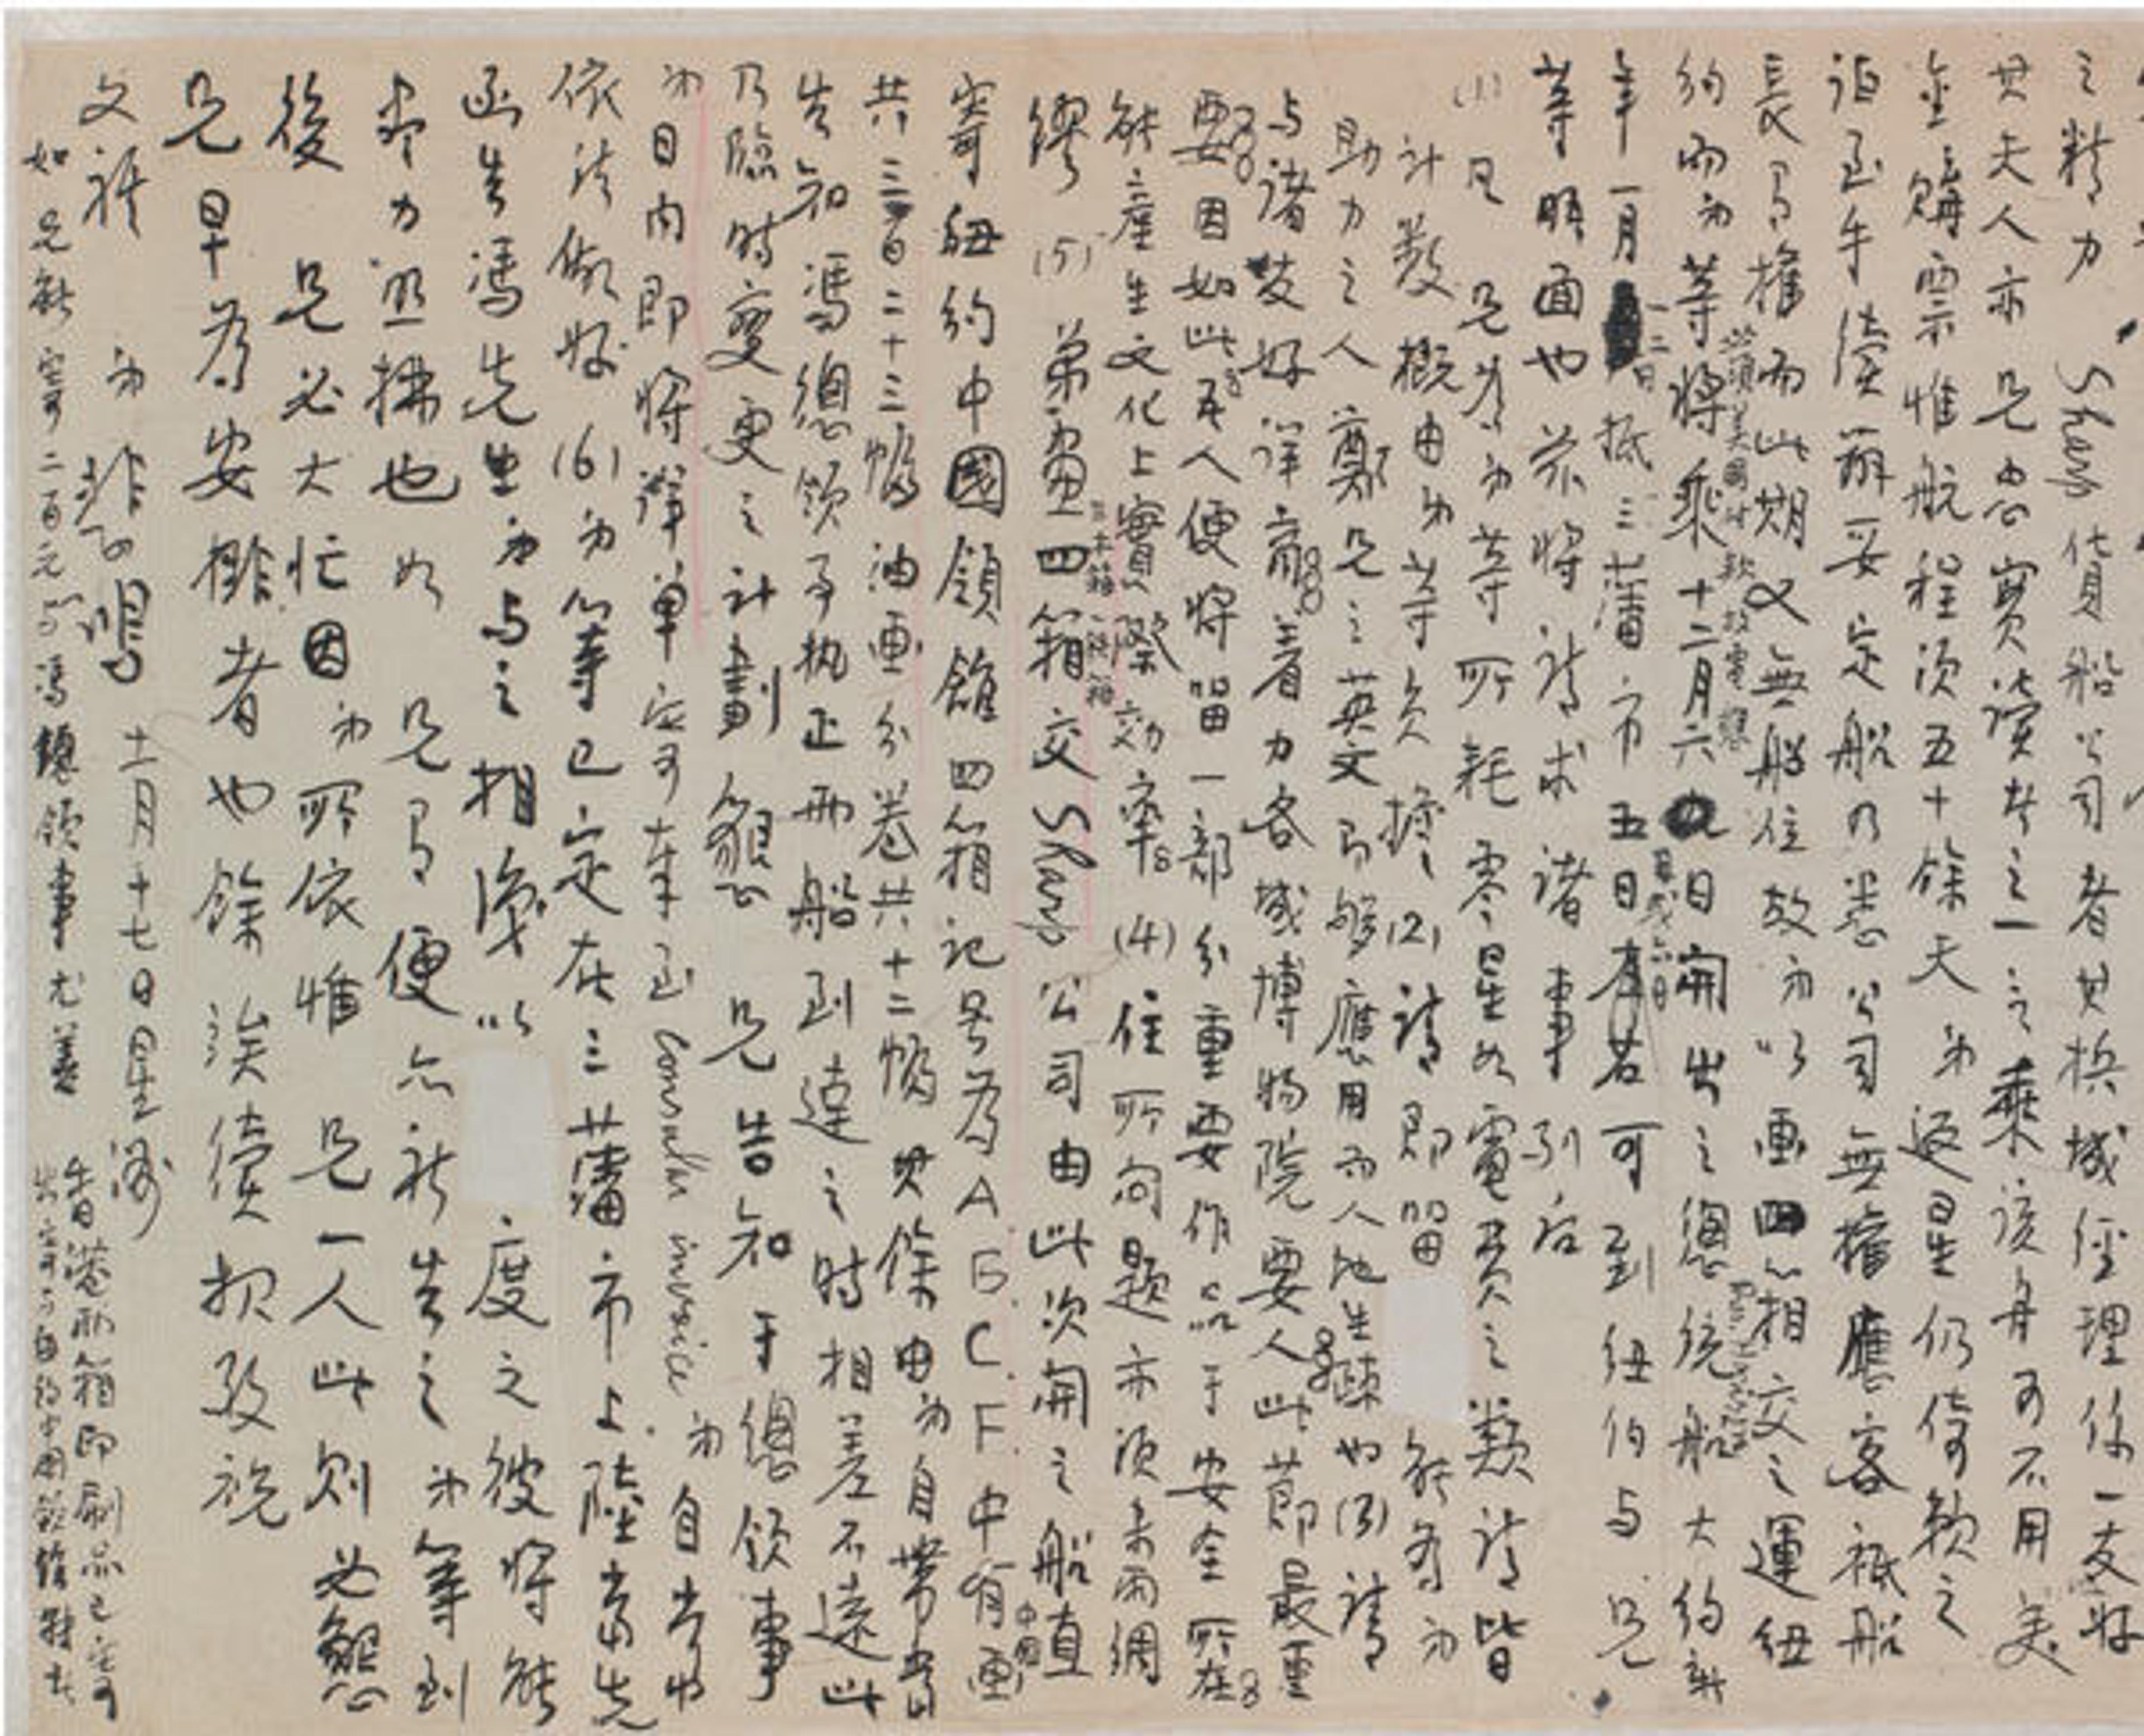 Fig. 5 Xu Beihong (1895–1953), Seventeen Letters, datable to 1938–48, handscroll, ink on paper, 12 11/16 x 365 3/8 in. (32.3 x 928.0 cm). The Lin Yutang Family Collection, Partial and Promised Gift of Richard M. Lai, Jill Lai Miller, and Larry C. Y. Lai in memory of Taiyi Lin Lai (2005.509.12). Detail of Letter no. 11.